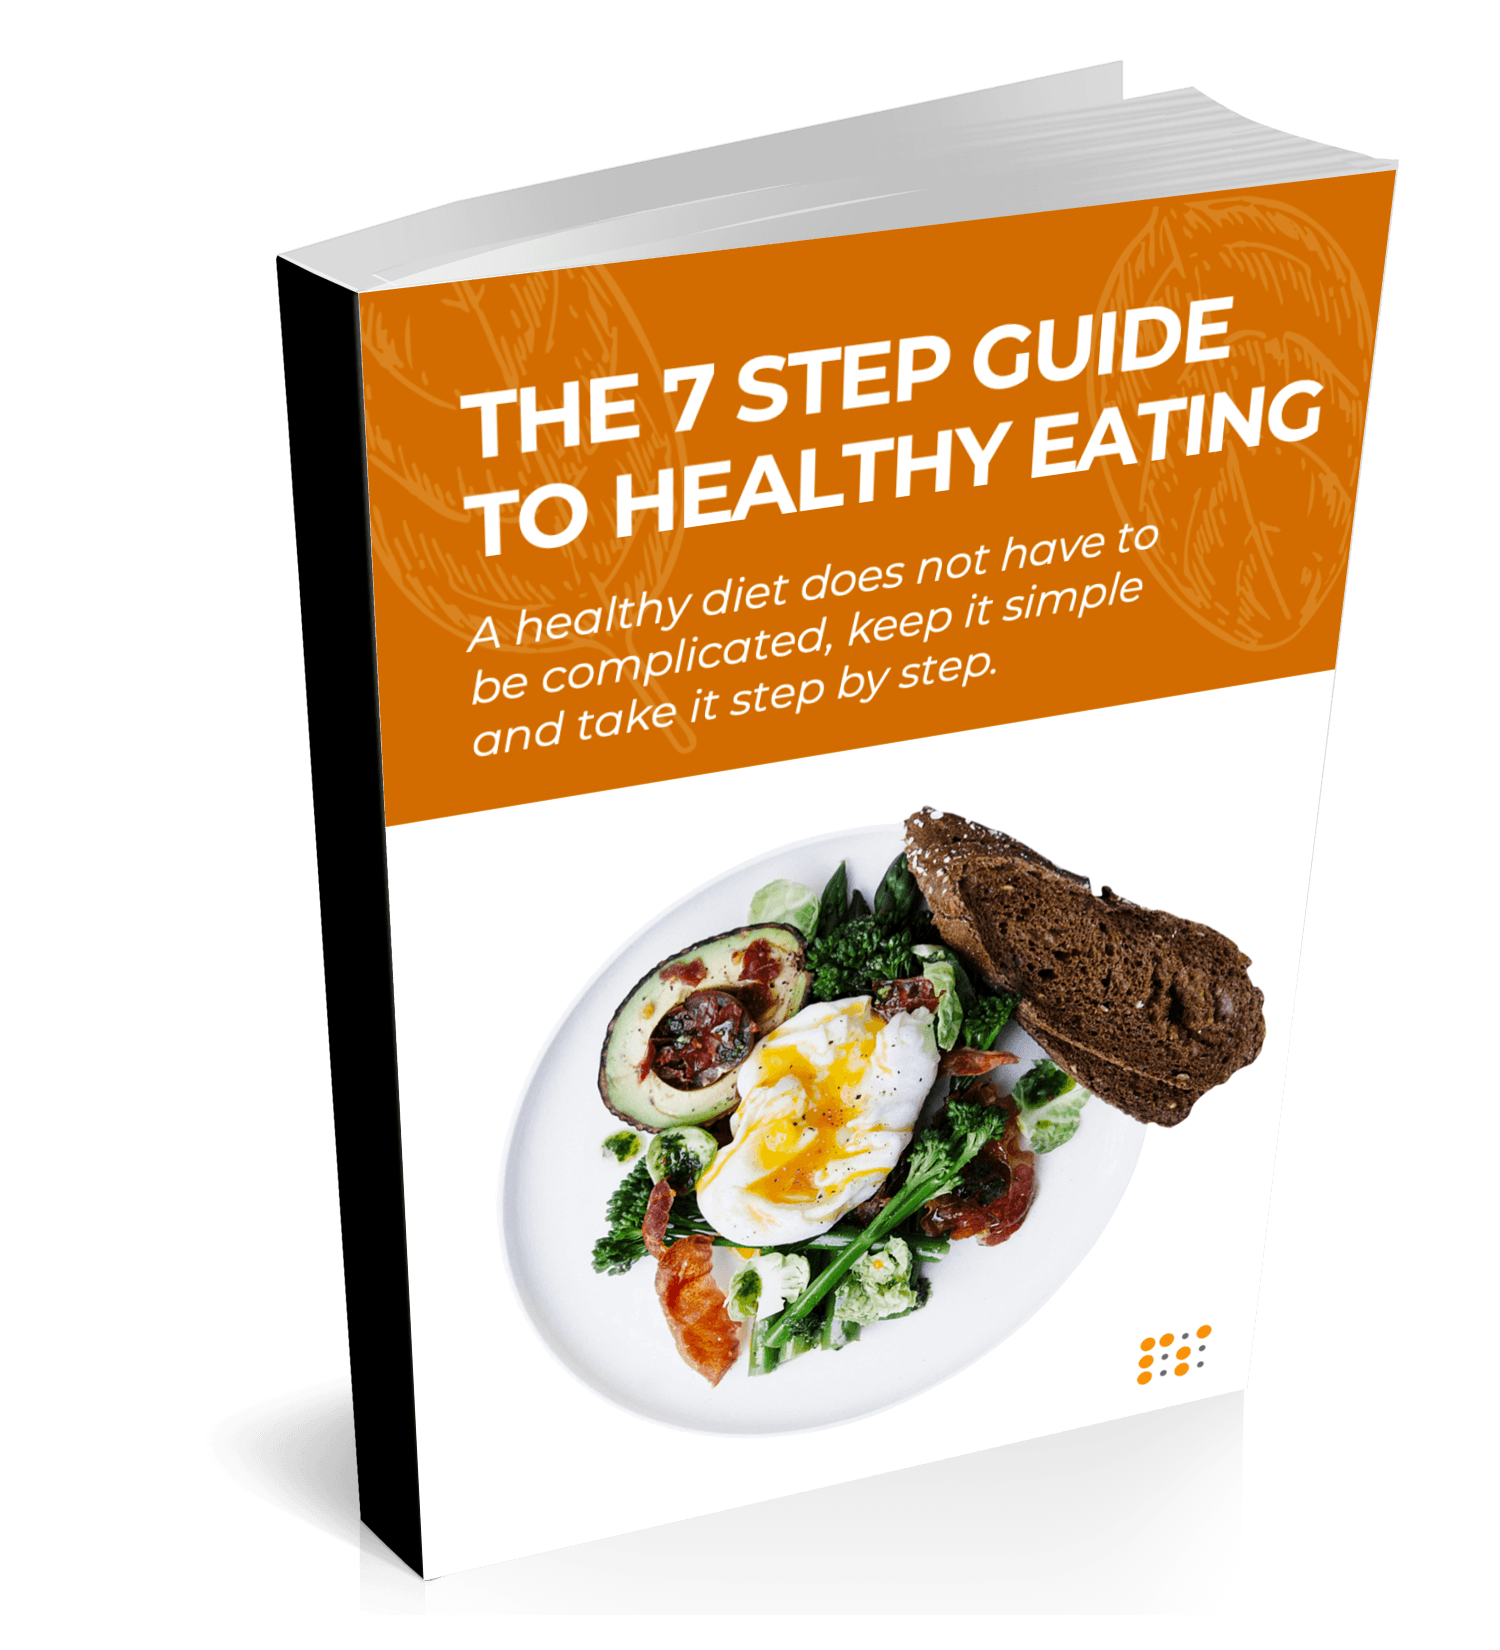 7 Step Guide To Healthy Eating eBook by Paul Stokes